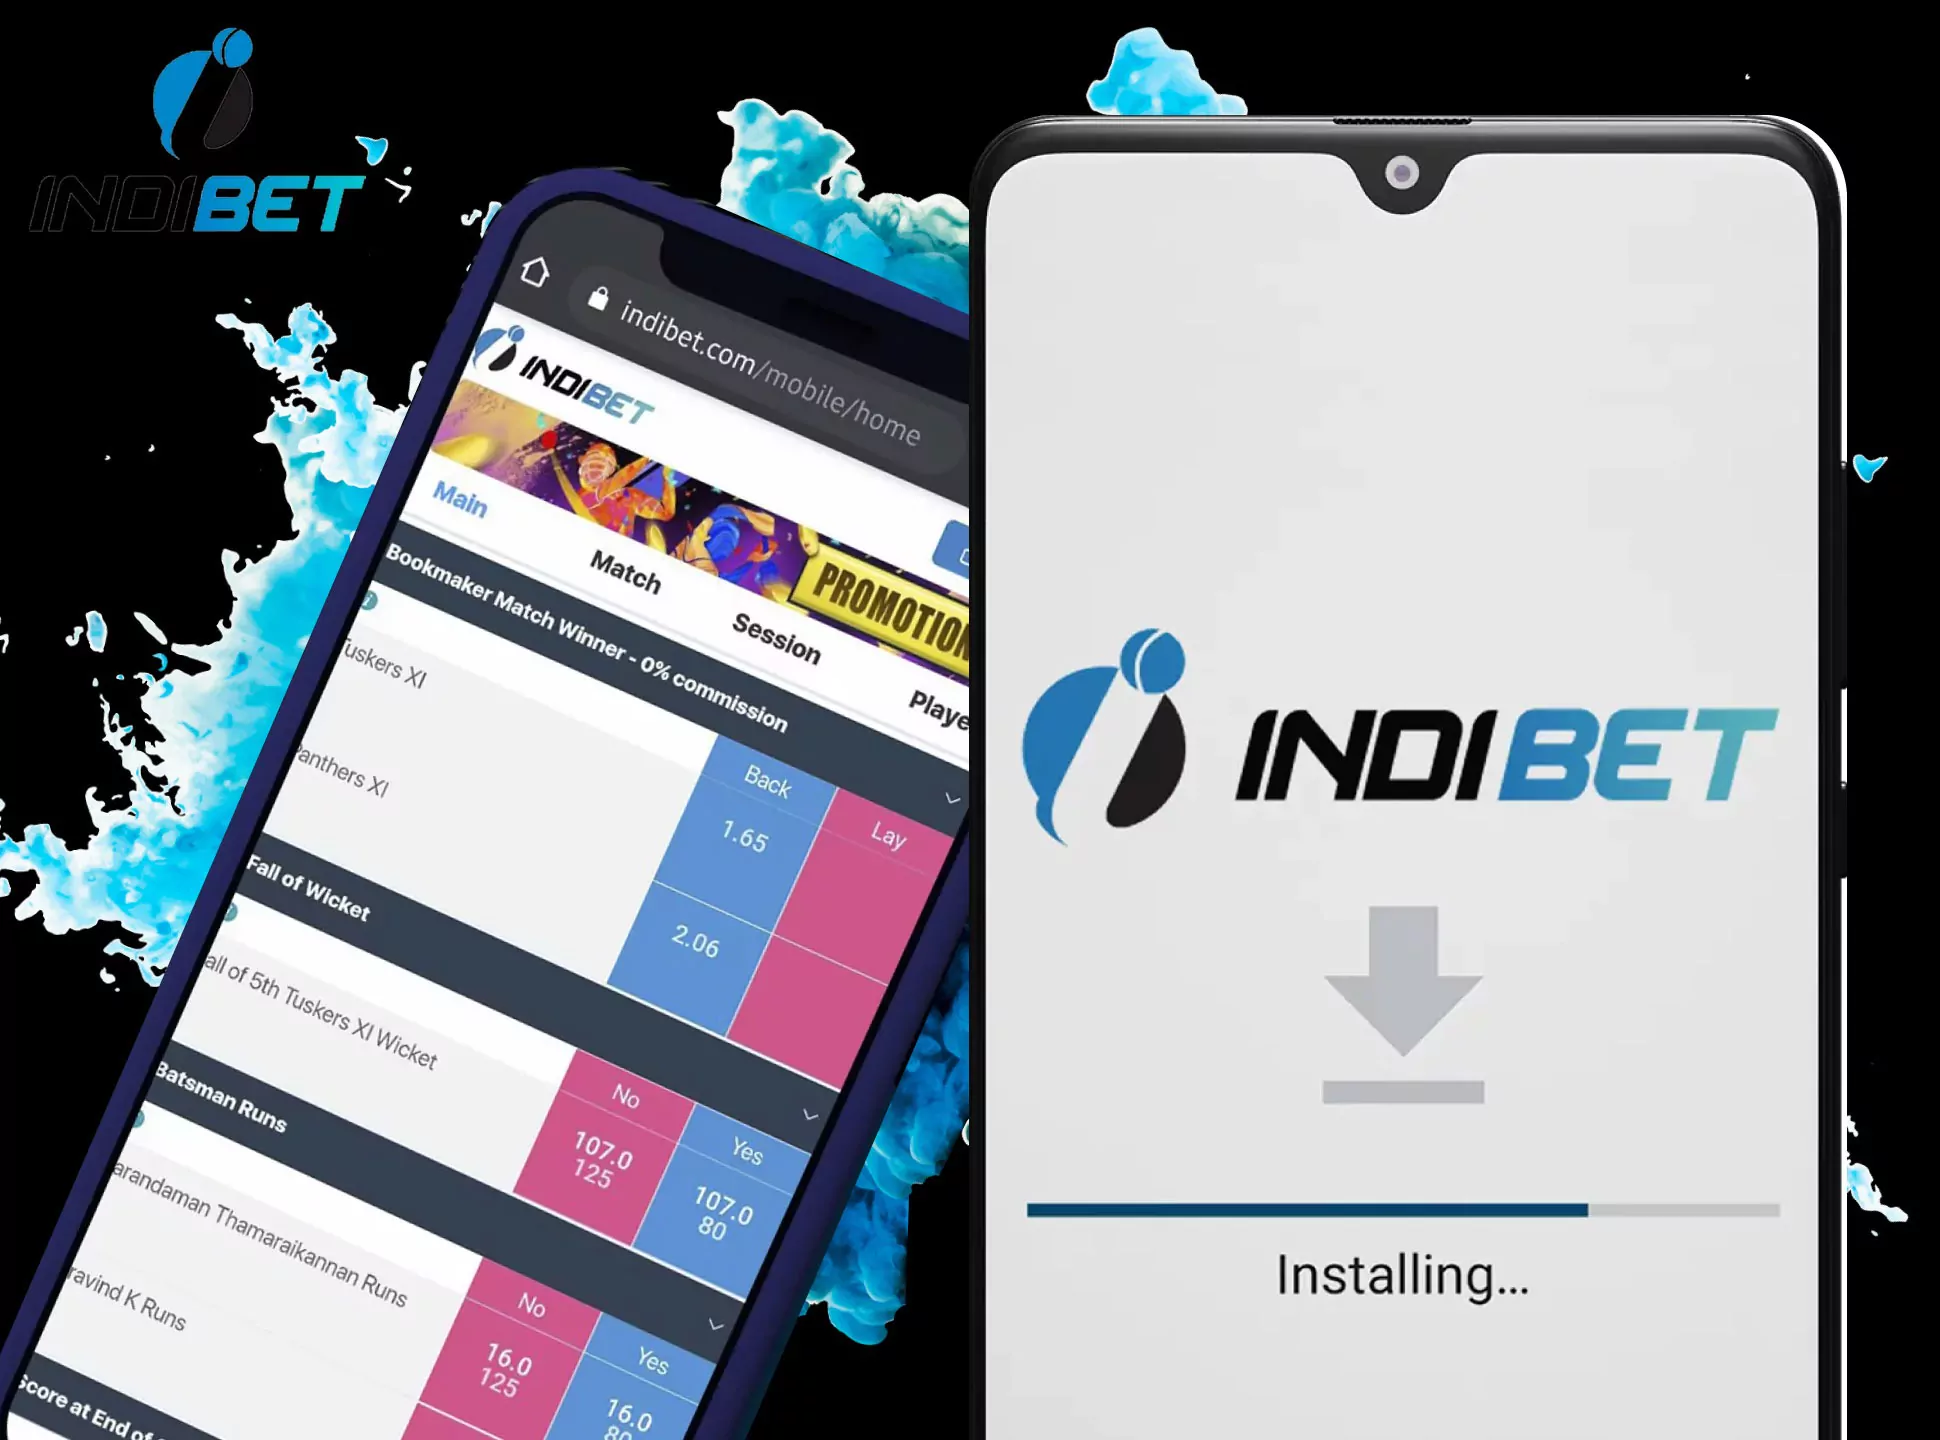 Indibet is very comfortable place to bet and play.